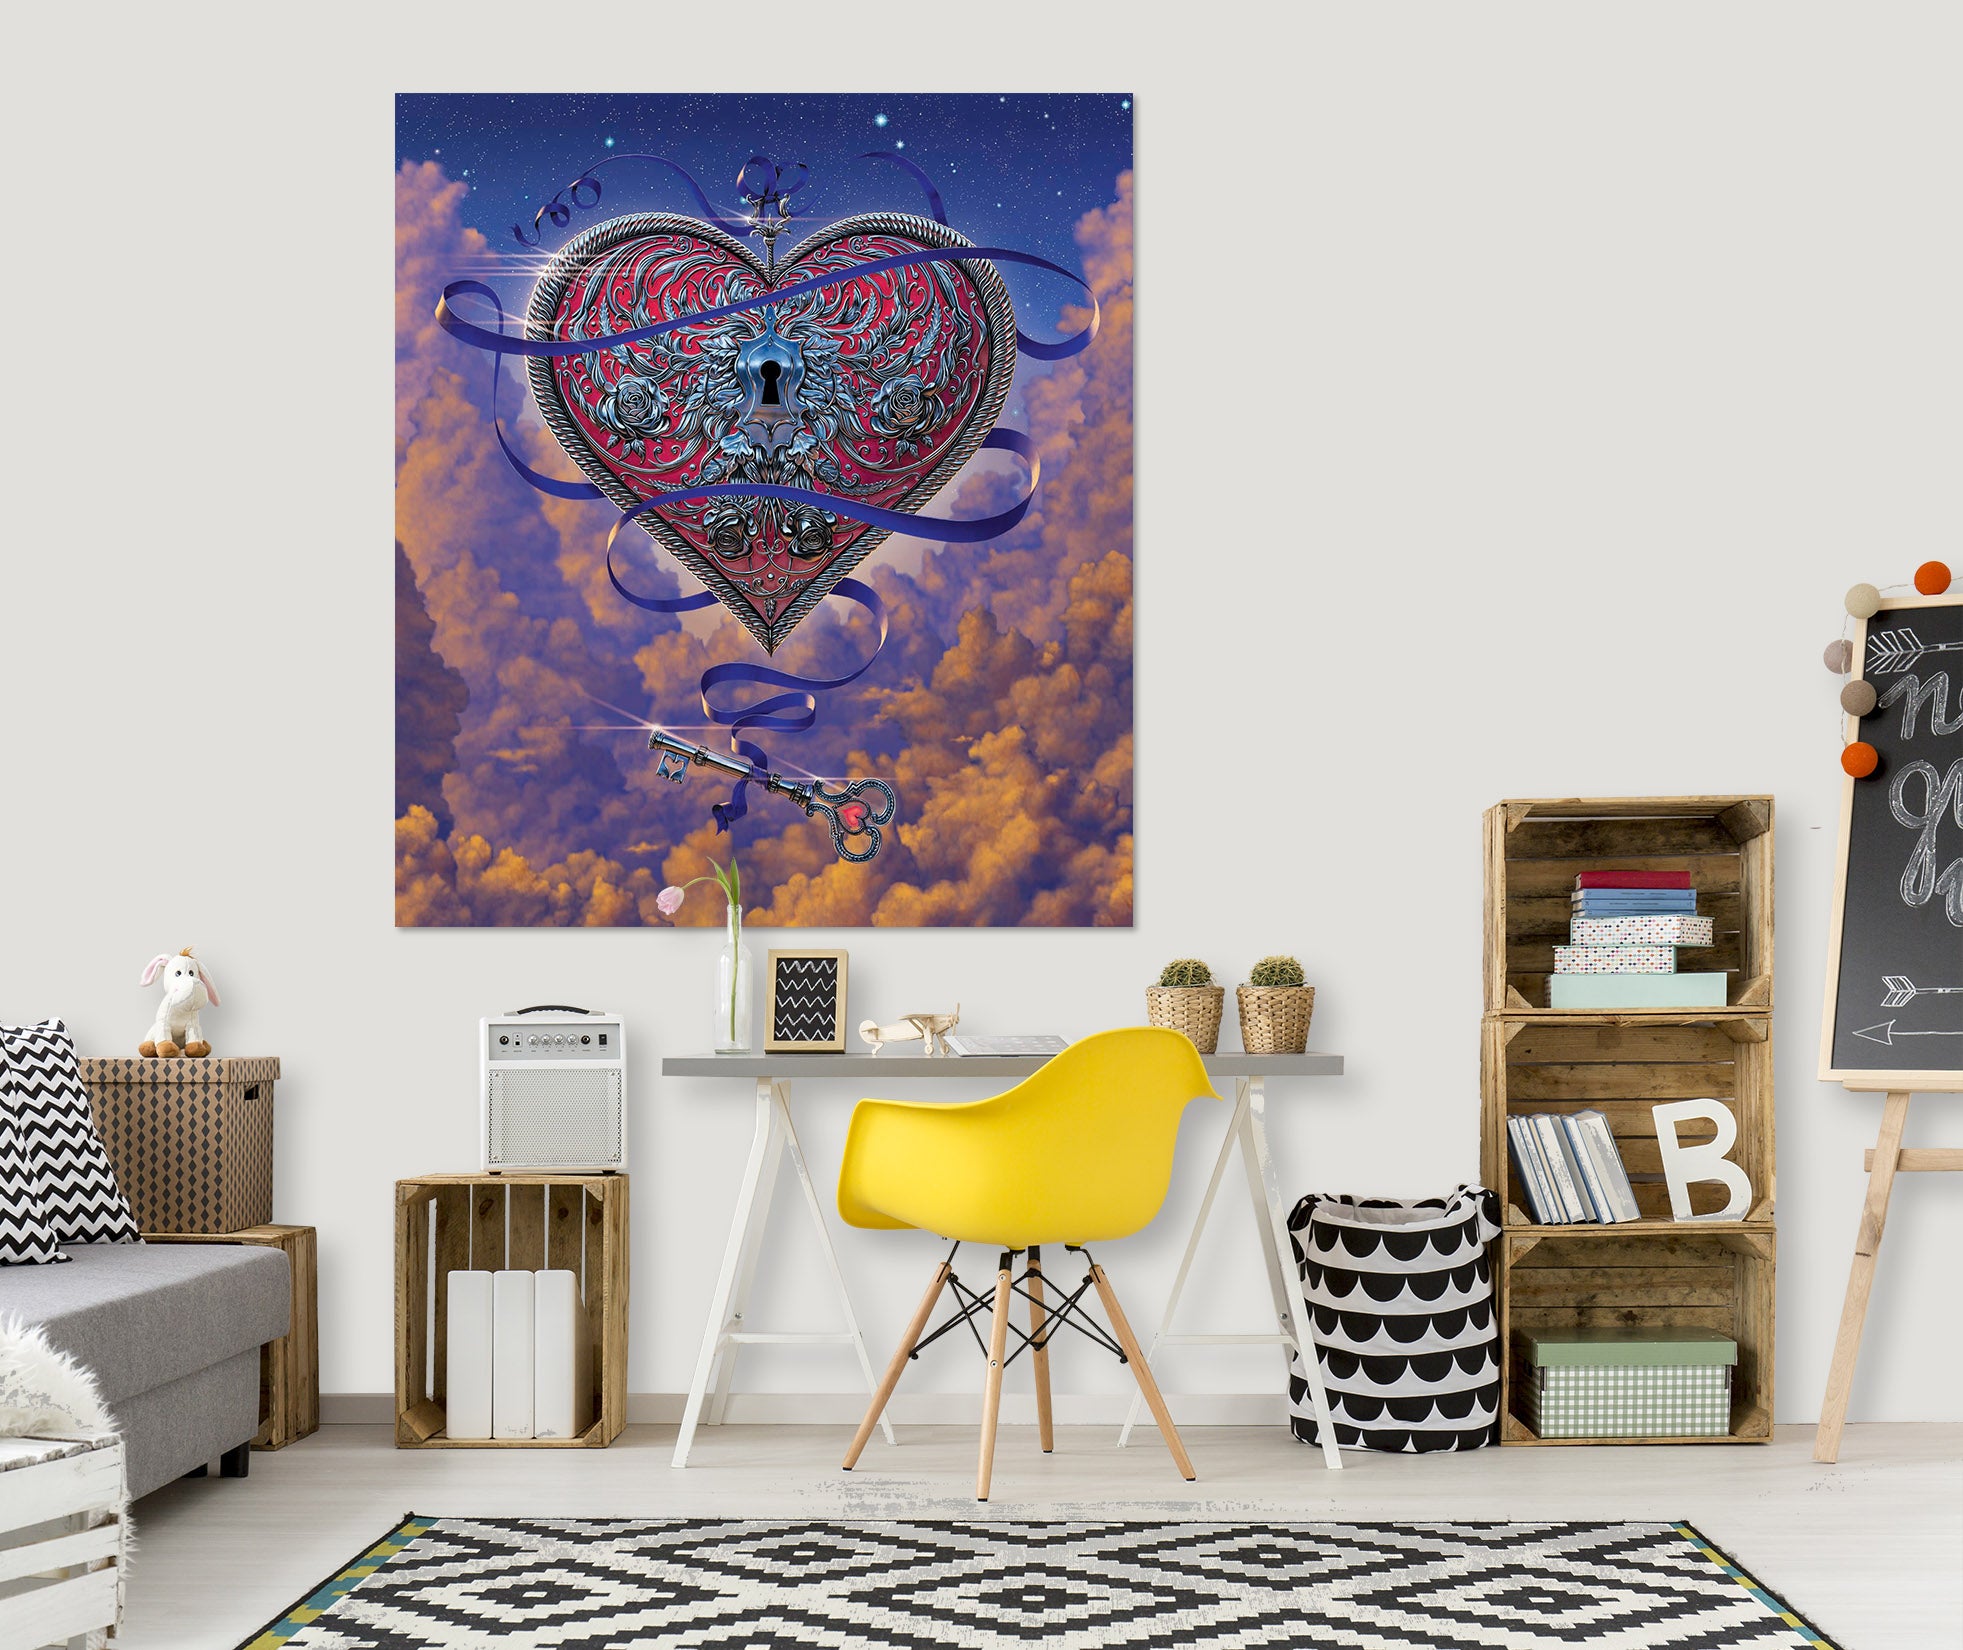 3D Heart And Key 041 Vincent Hie Wall Sticker